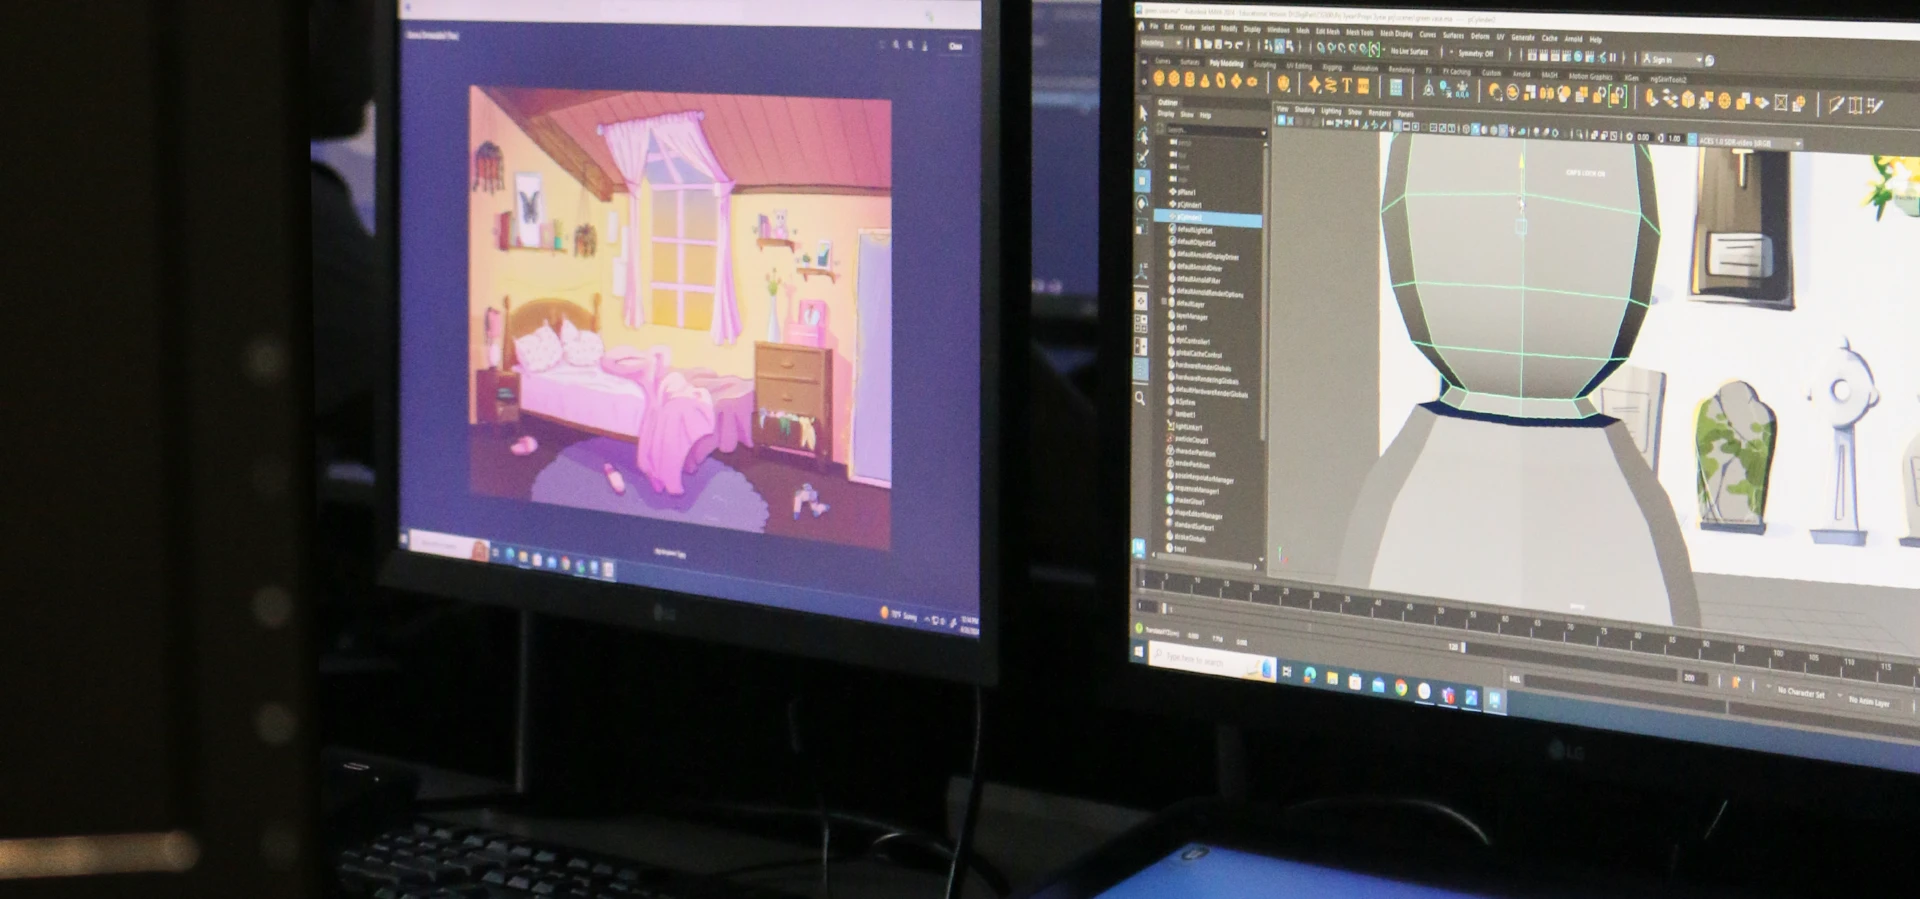 two screens show the 3D model and environment created by a student for a project